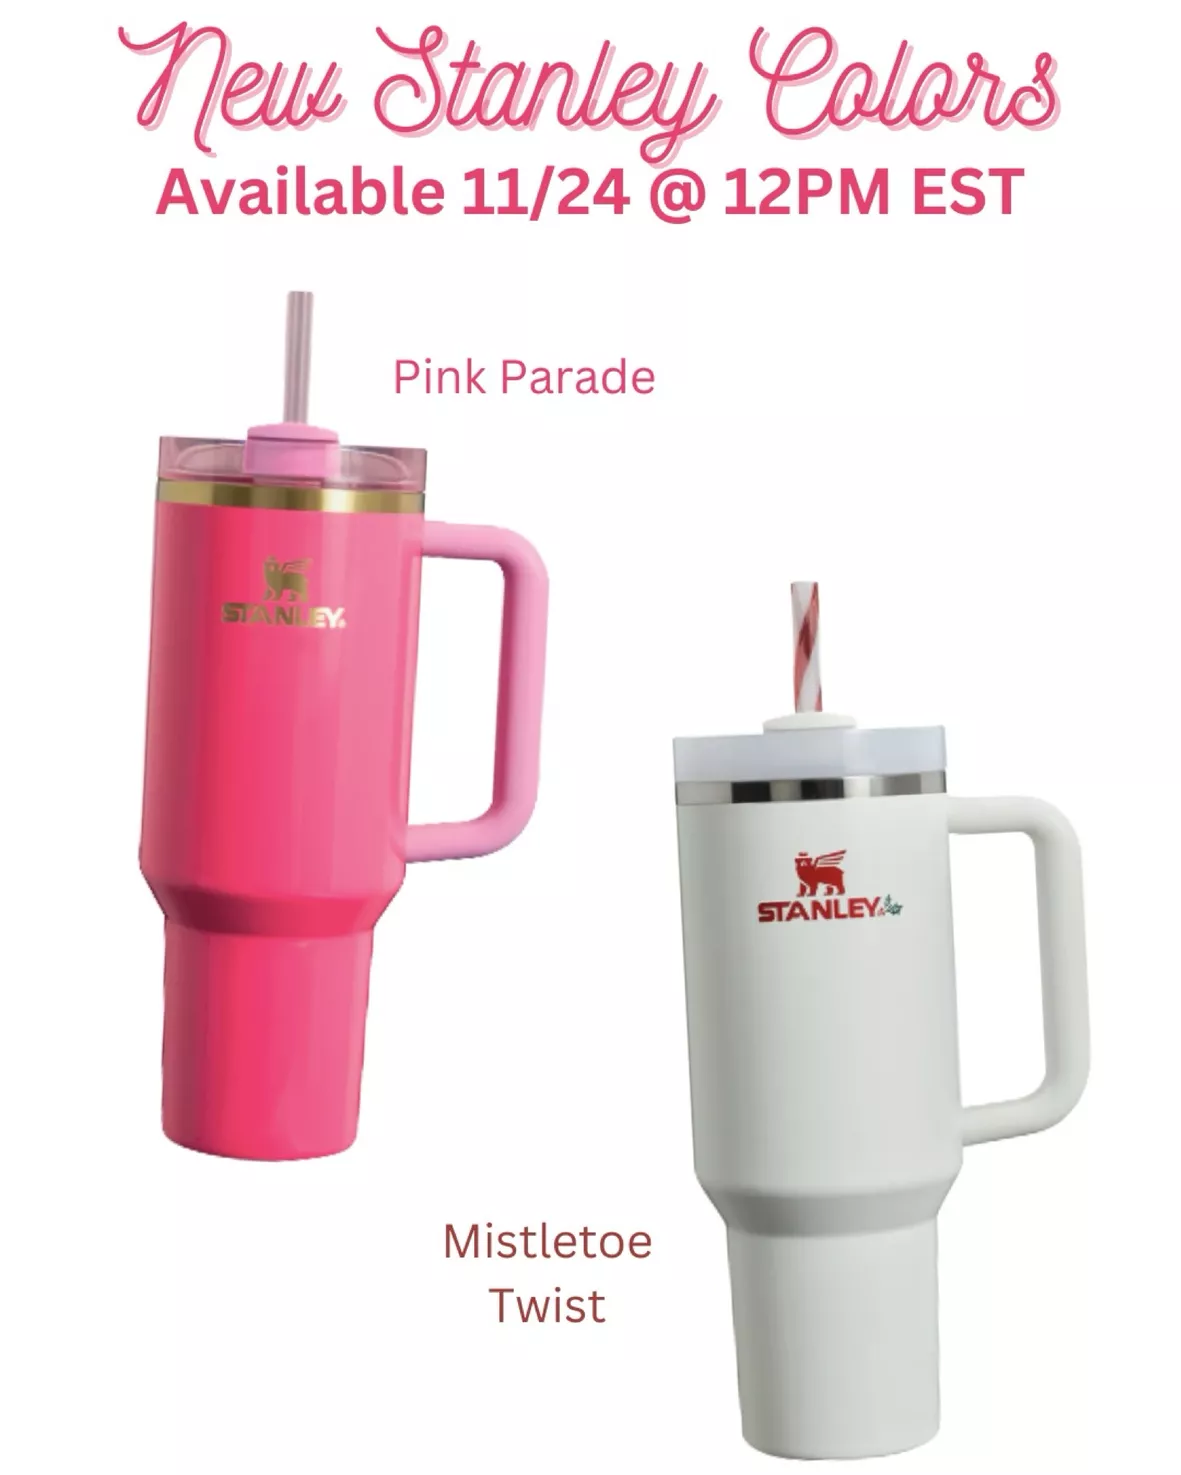 ✓ Stanley 40 oz Quencher Pink Parade & Mistletoe Twist Combo SHIPS NOW ✓